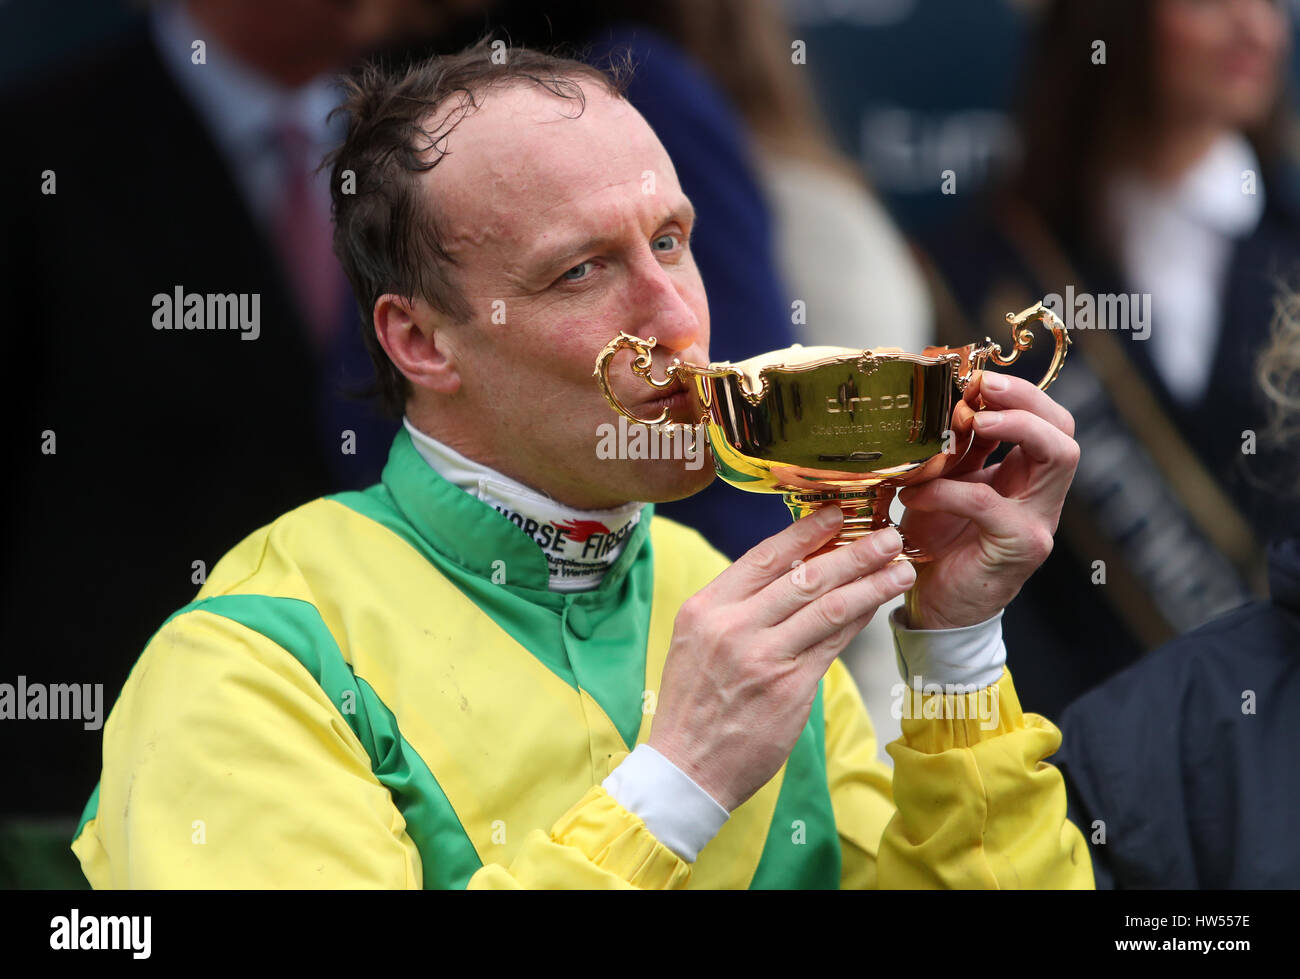 Jockey Robbie Power celebrates with the trophy after his winning ride on Sizing John in the Timico Cheltenham Gold Cup Chase during Gold Cup Day of the 2017 Cheltenham Festival at Cheltenham Racecourse. Stock Photo